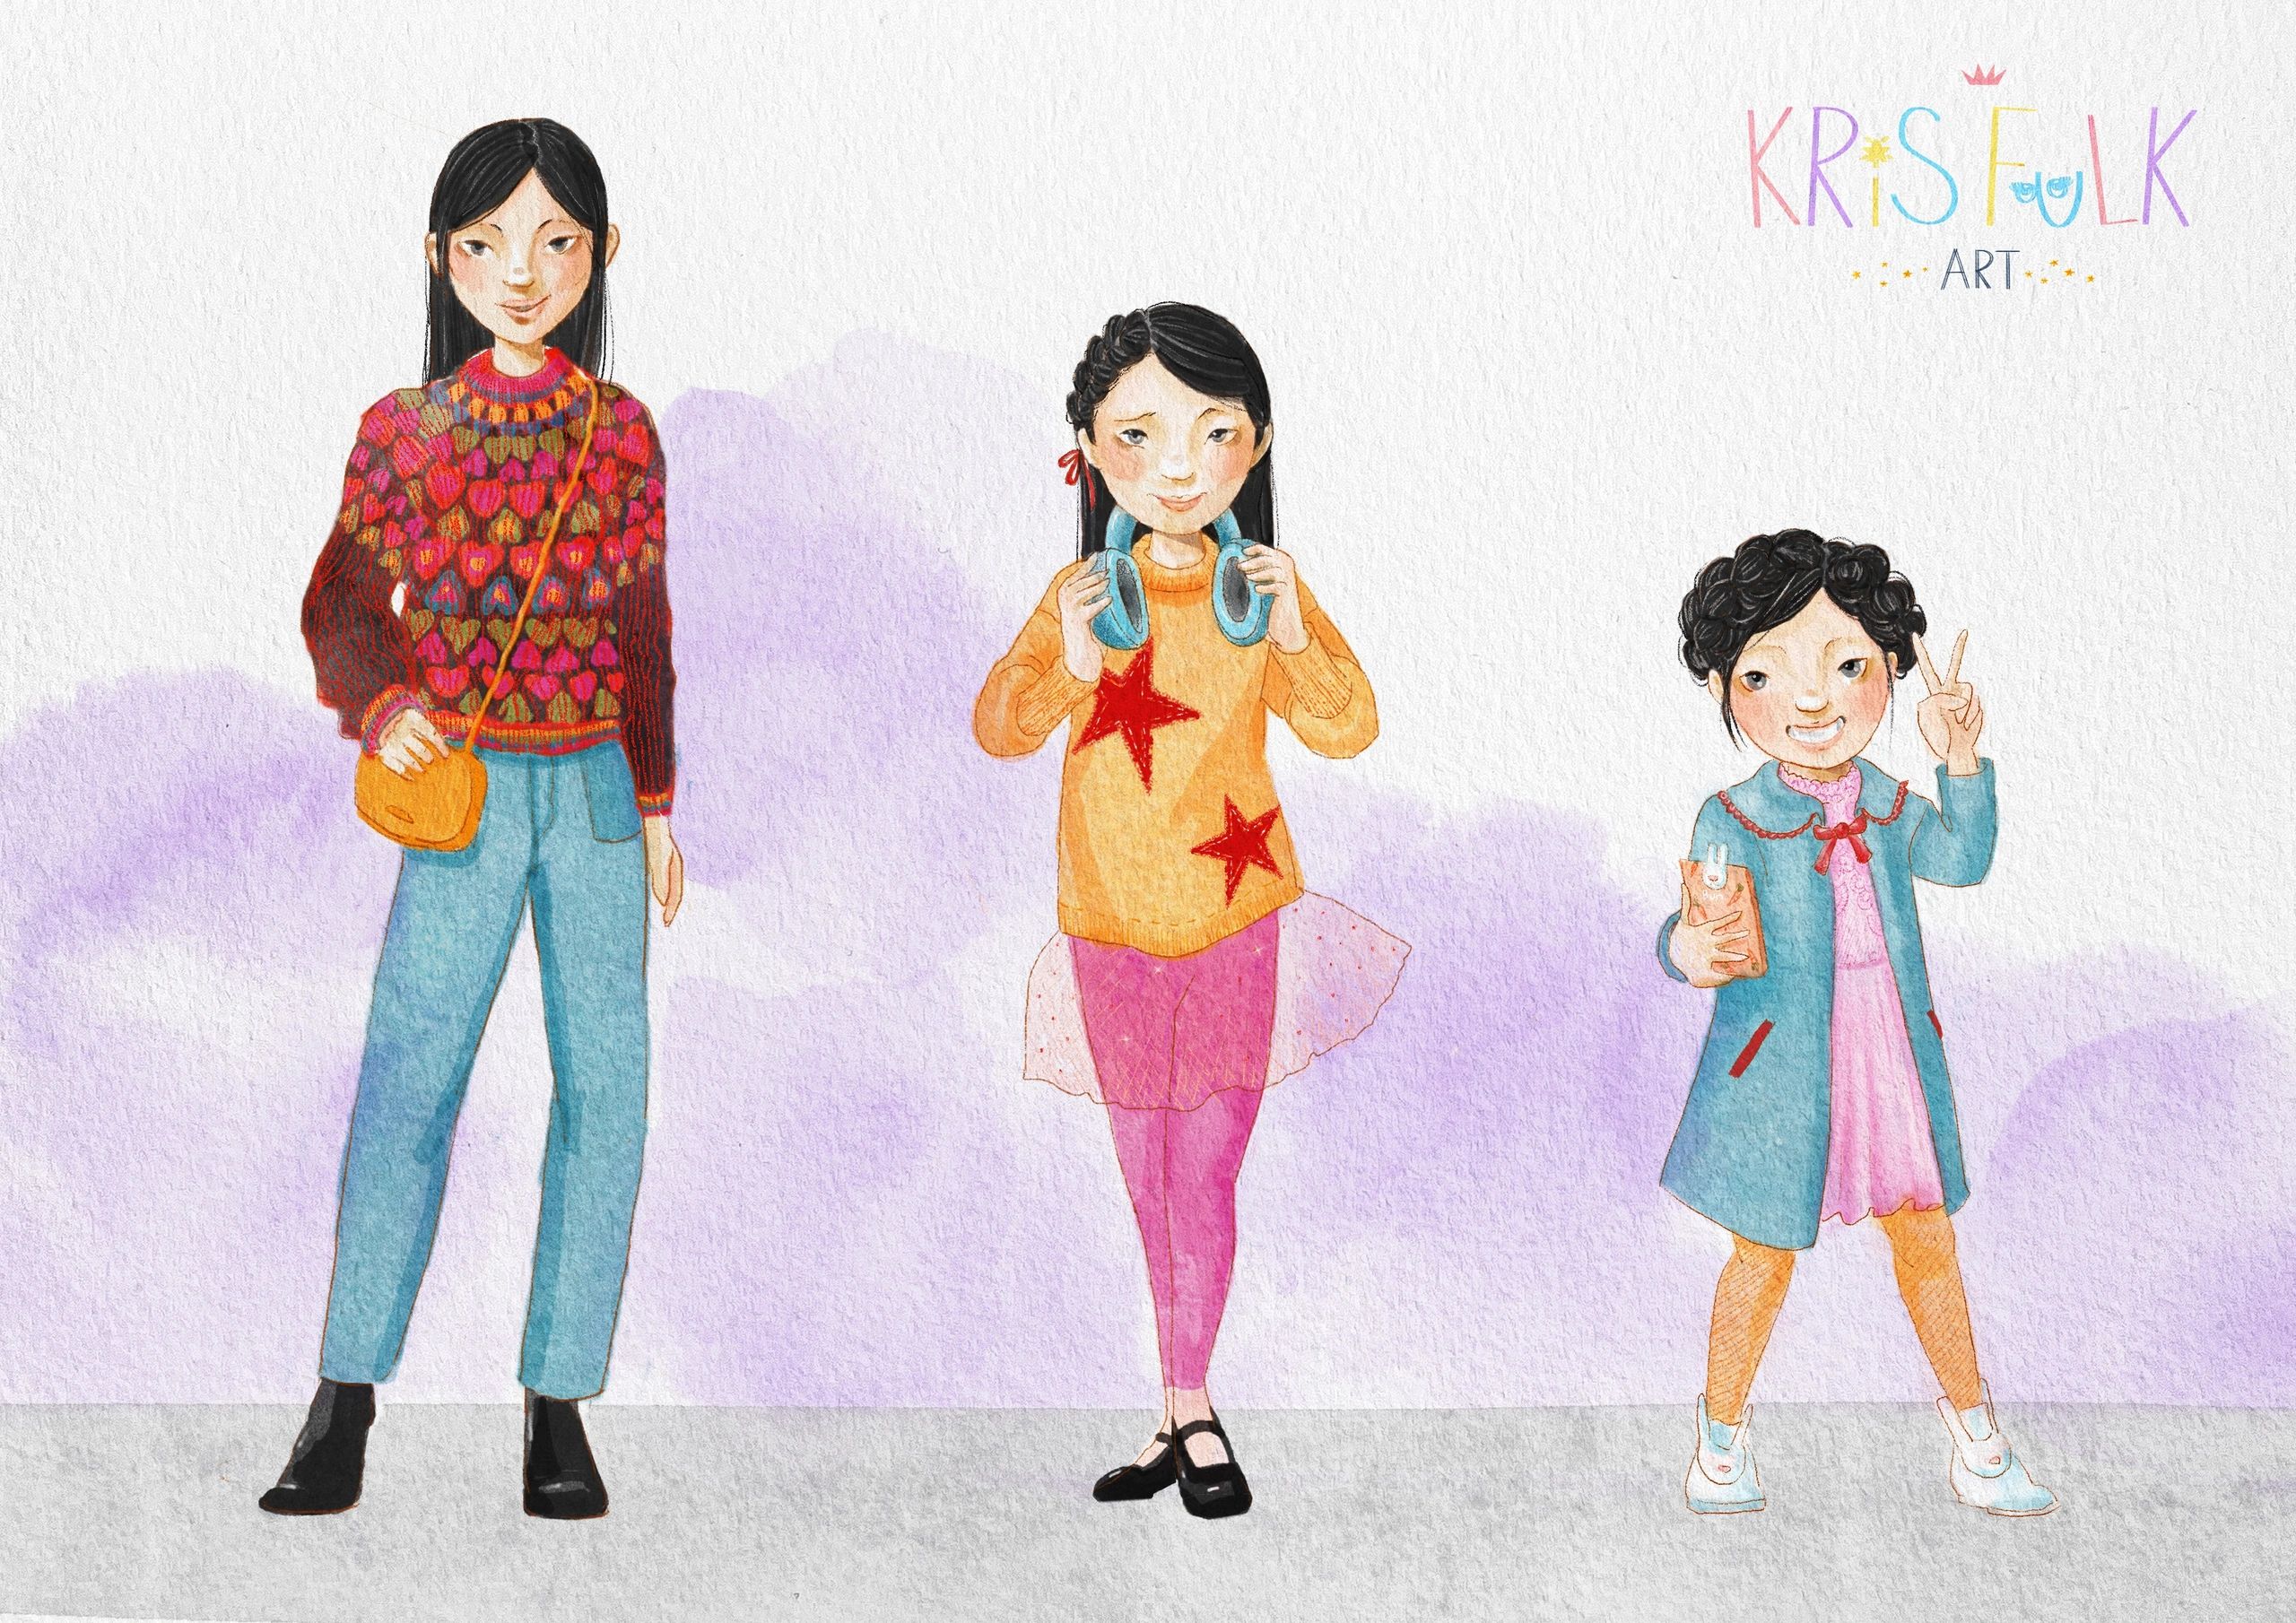 A painted illustration of three girl characters in various ages.